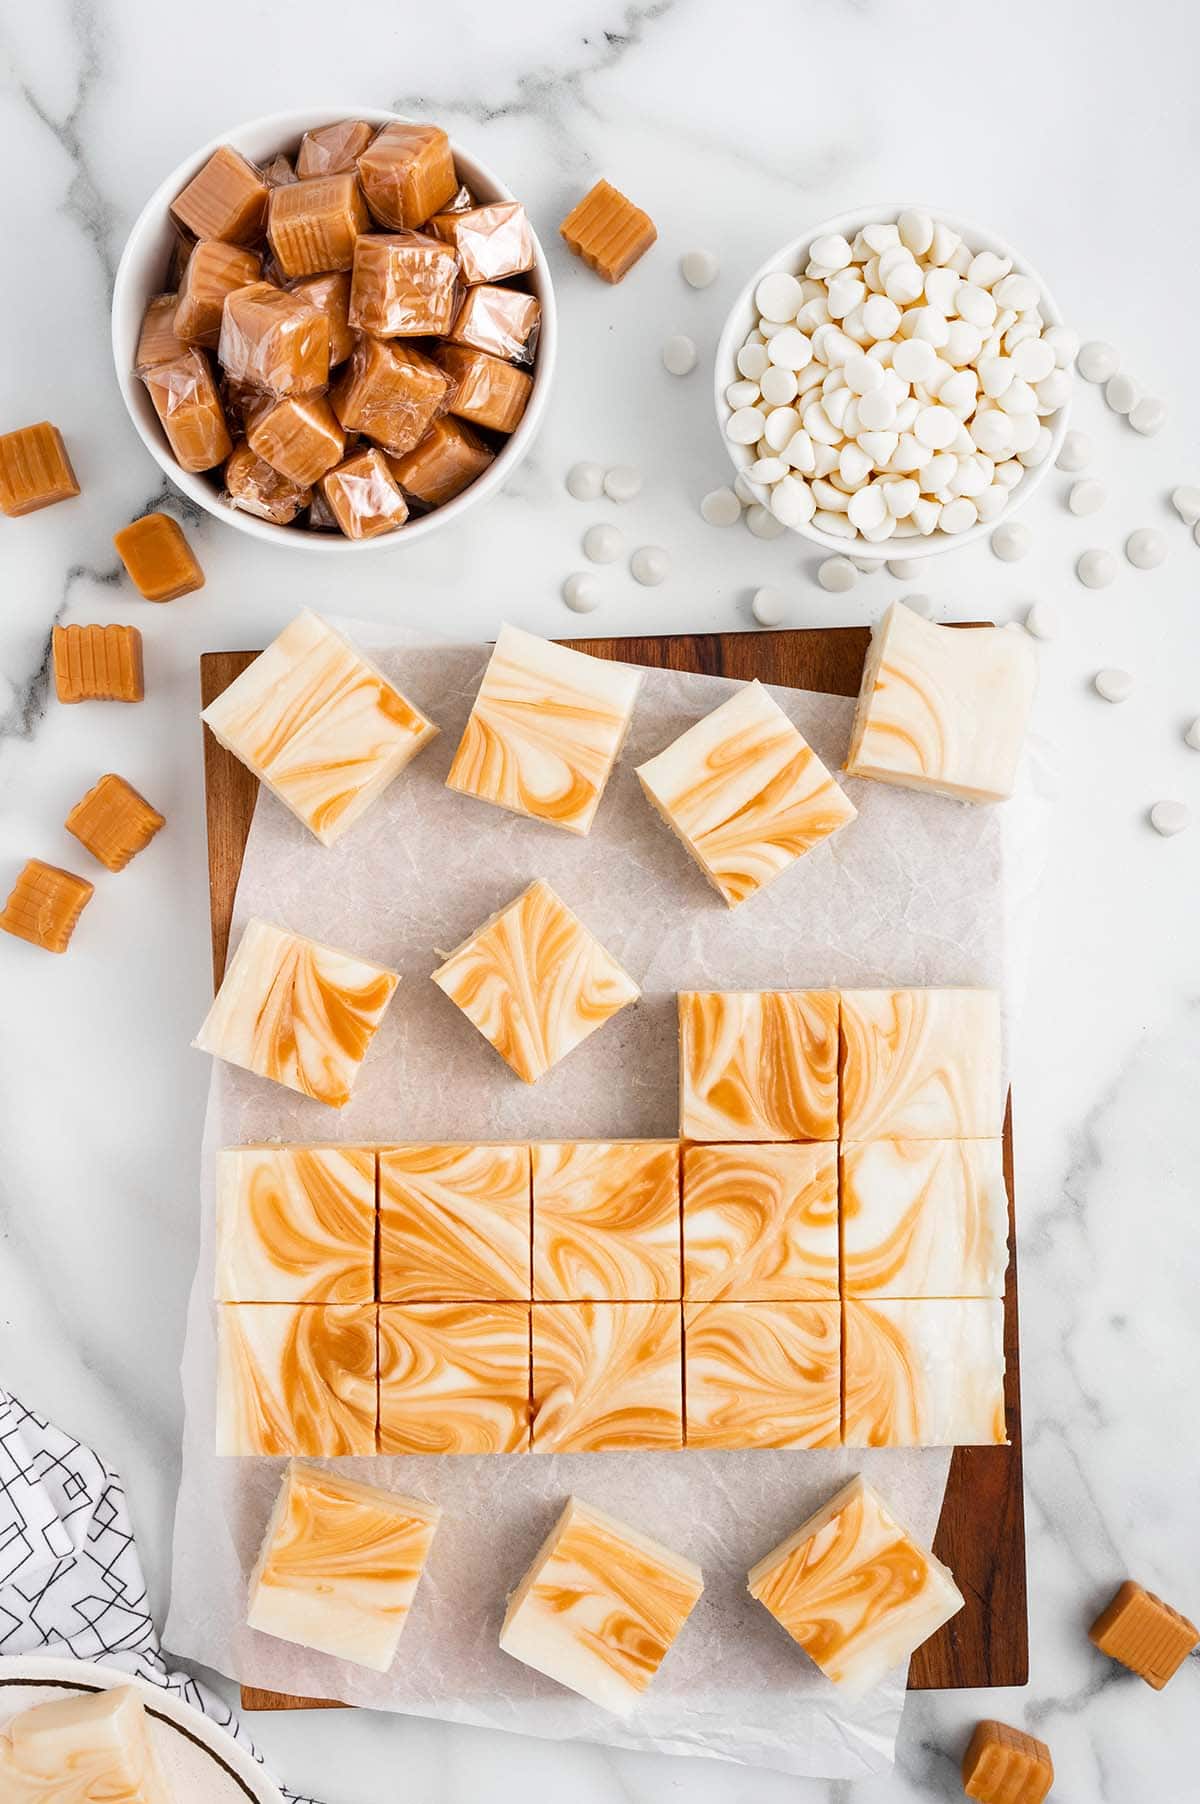 White Chocolate Caramel Fudge cut into squares on top of cutting board.